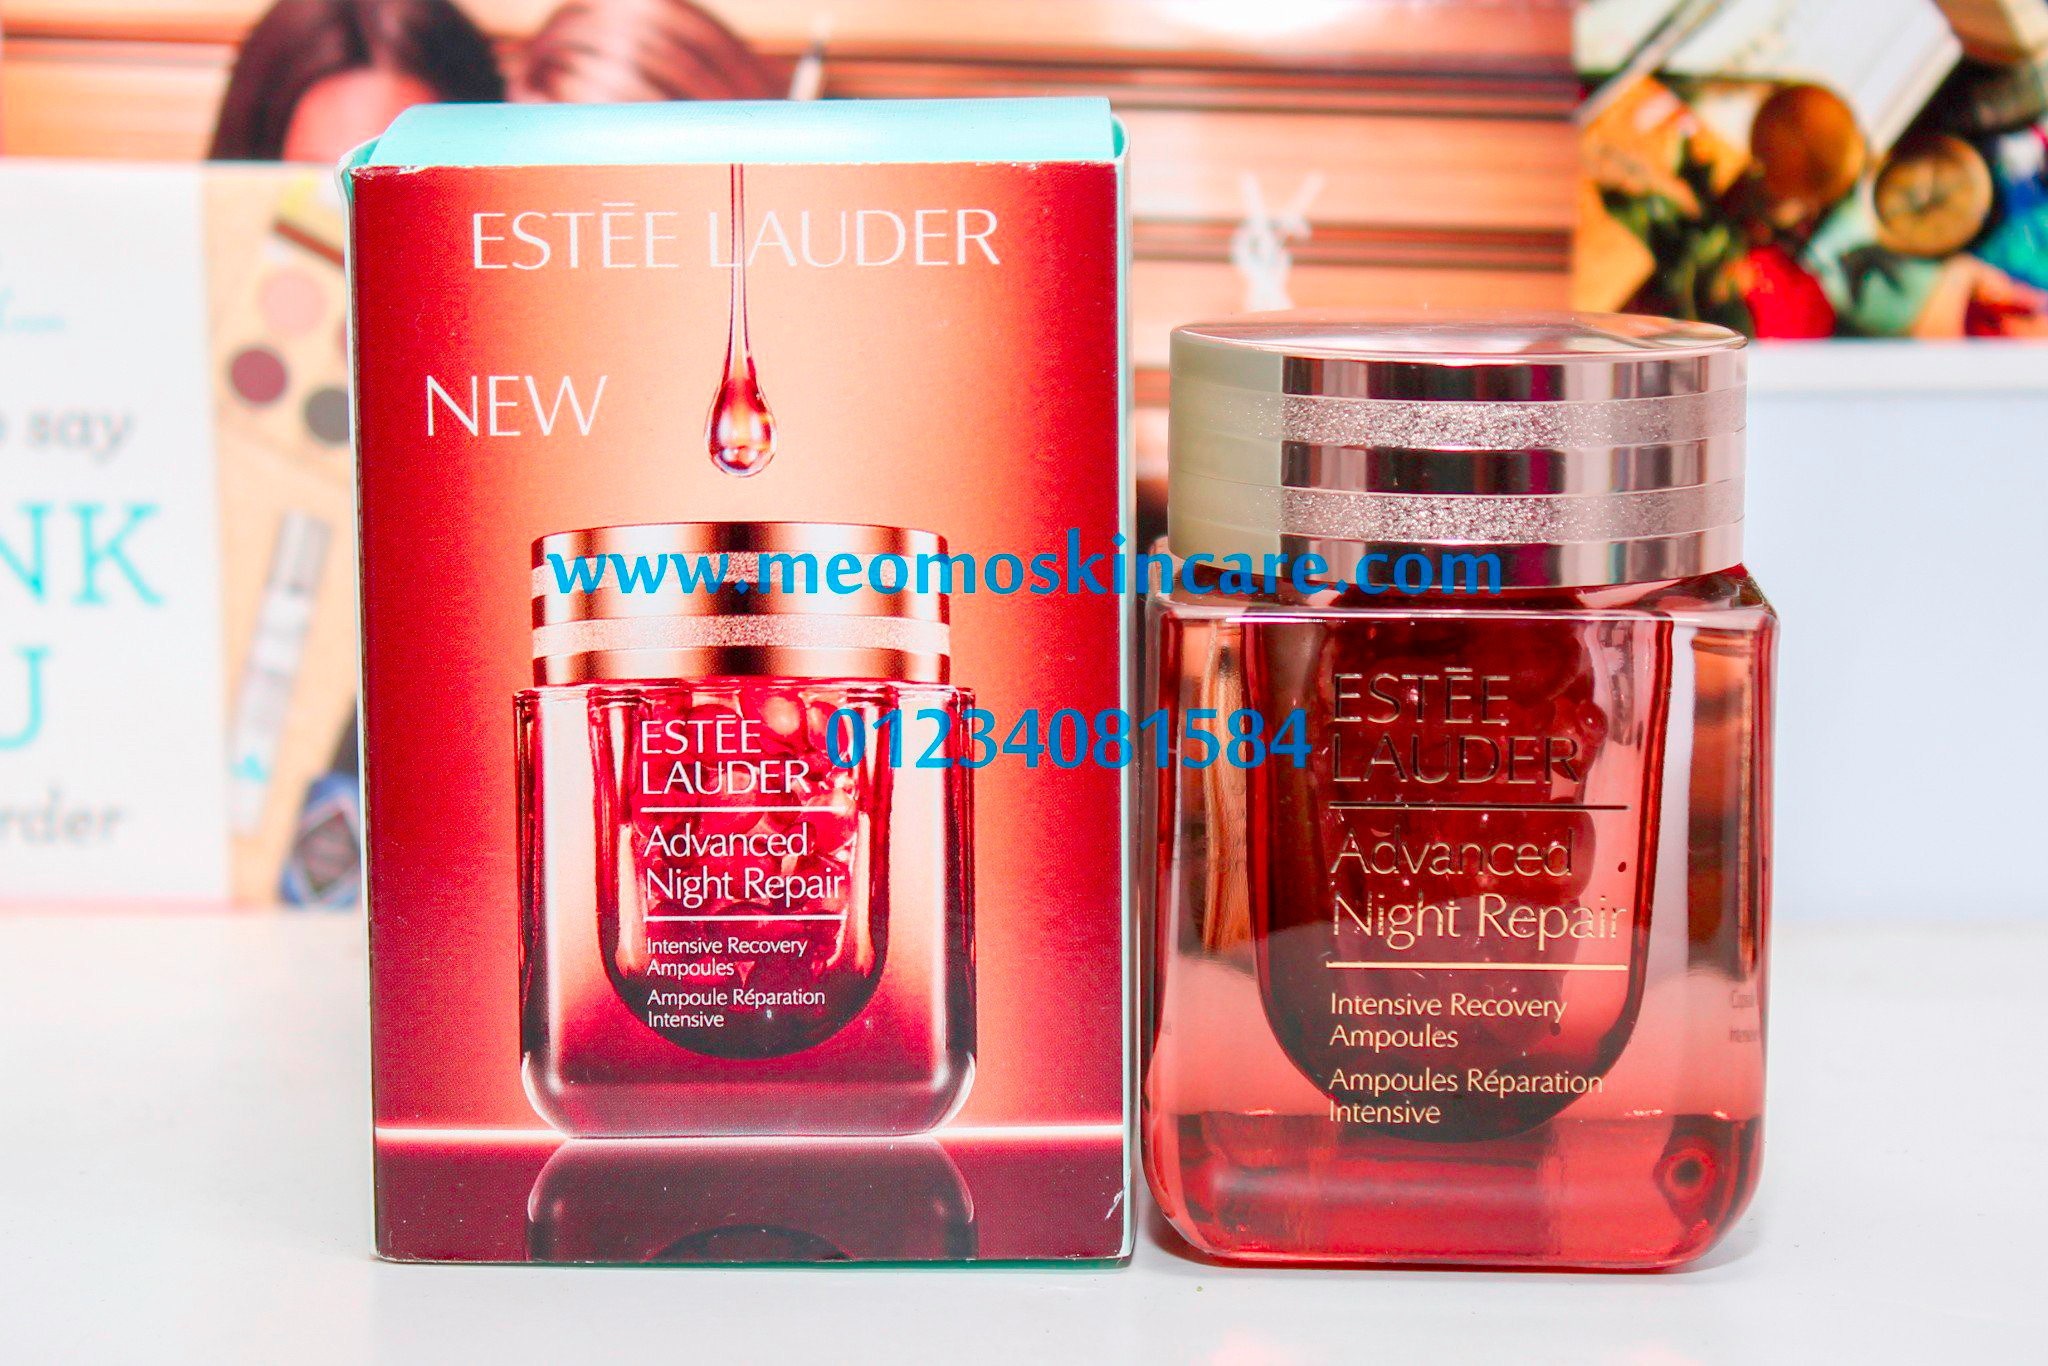 Estee Lauder Advanced Night Repair Intense Recovery Ampoules